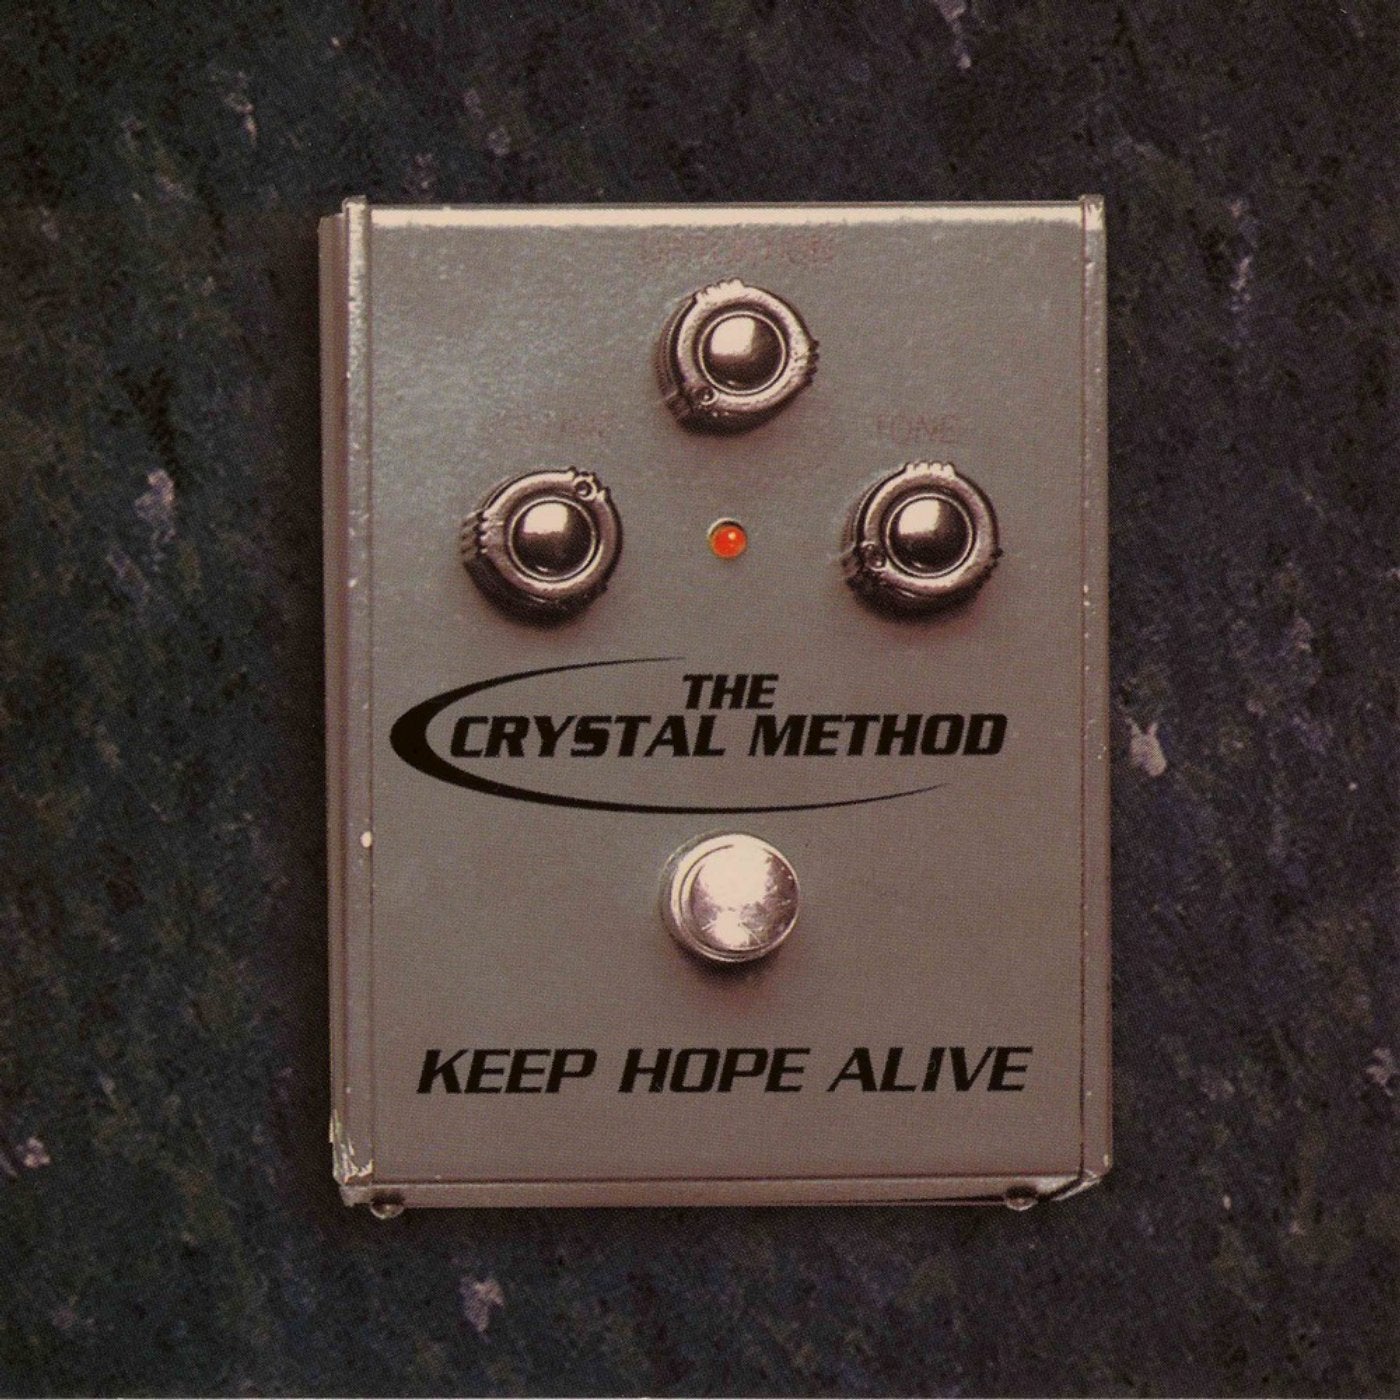 Keep hoping. The Crystal method-keep hope Alive. Keeping hope Alive. The Crystal method - keep hope Alive there is hope, Дата релиза, альбом. The Crystal method keep hope Alive (Peter Paul Remix).